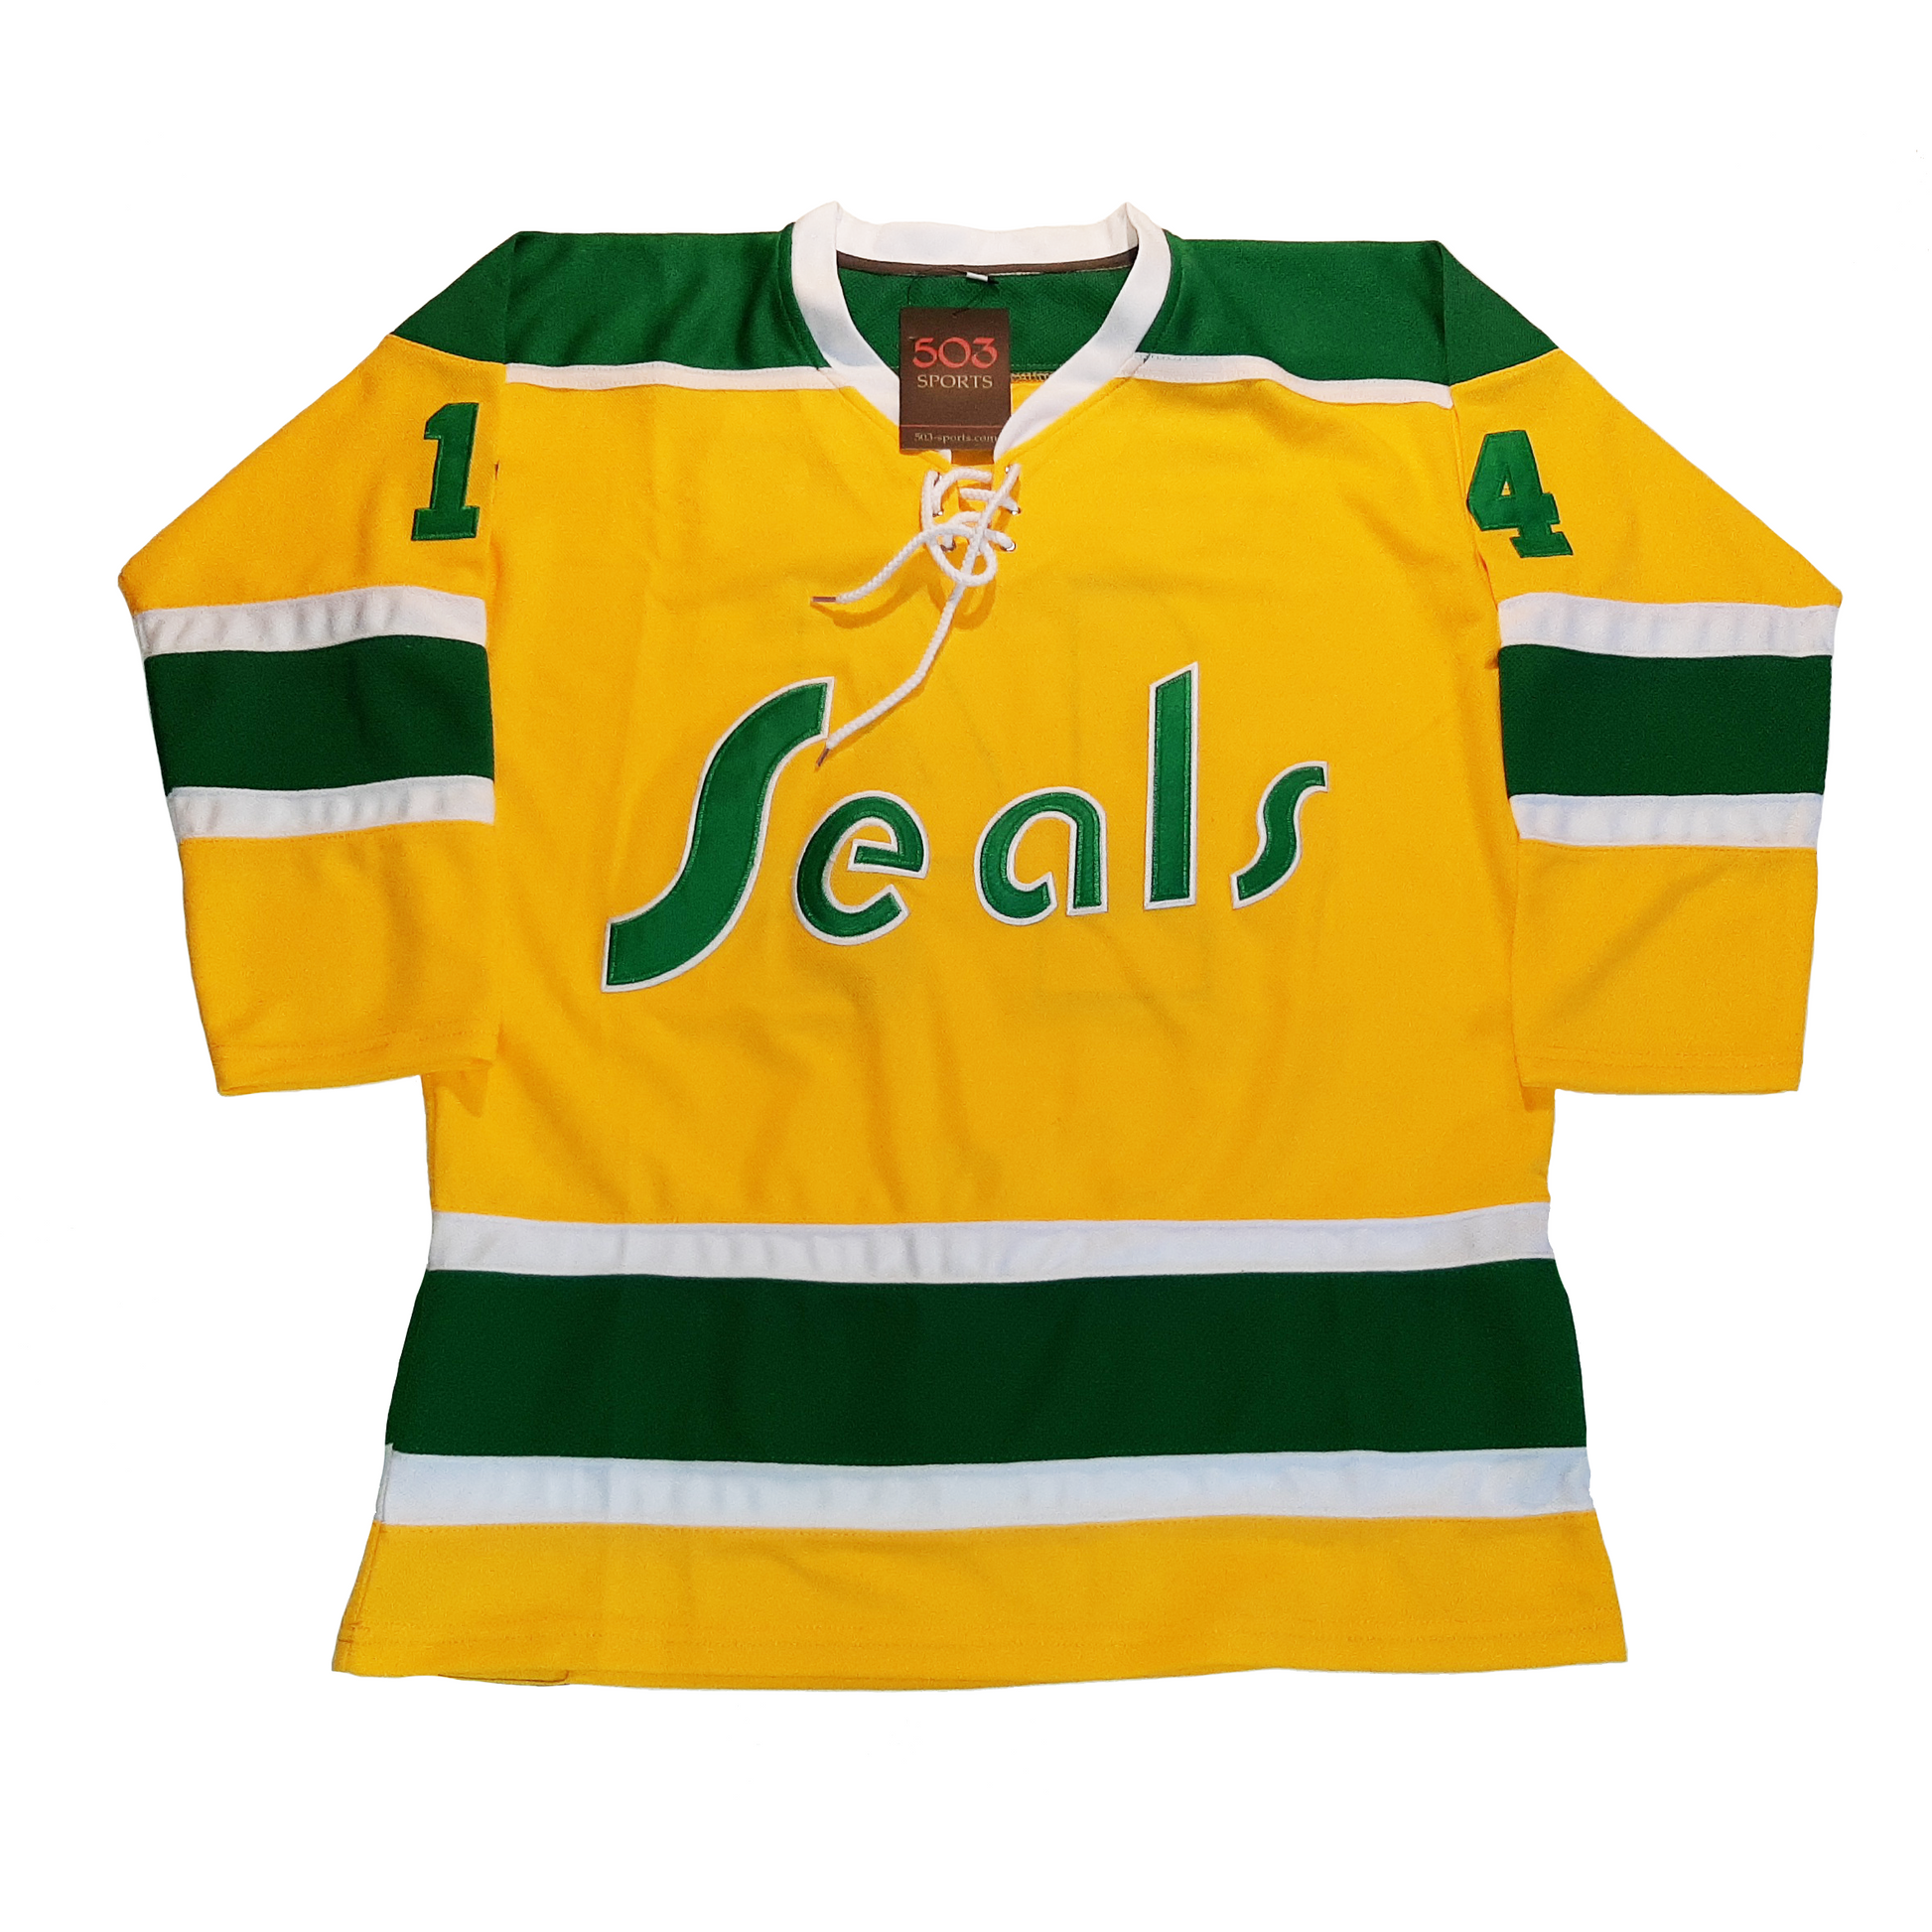 Boriz jerseys - $55.99 Shipped All Stitched Made to order GILLES MELOCHE 27 CALIFORNIA  GOLDEN SEALS HOCKEY JERSEY   seals-hockey-jersey/?showHidden=true&_ga=2.125034057